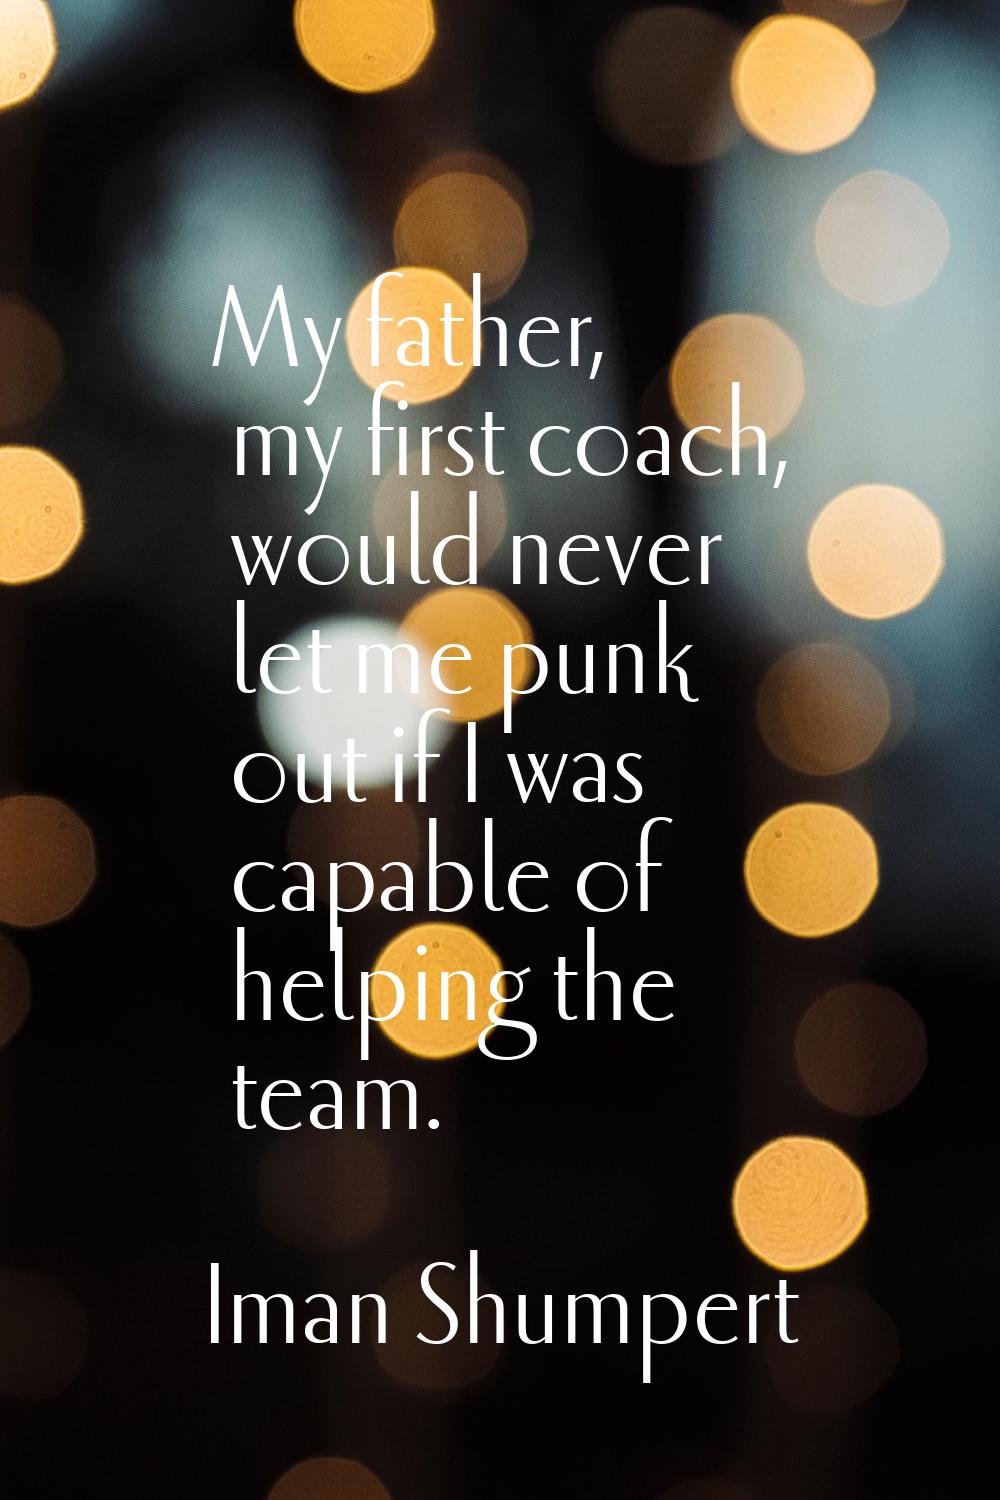 My father, my first coach, would never let me punk out if I was capable of helping the team.